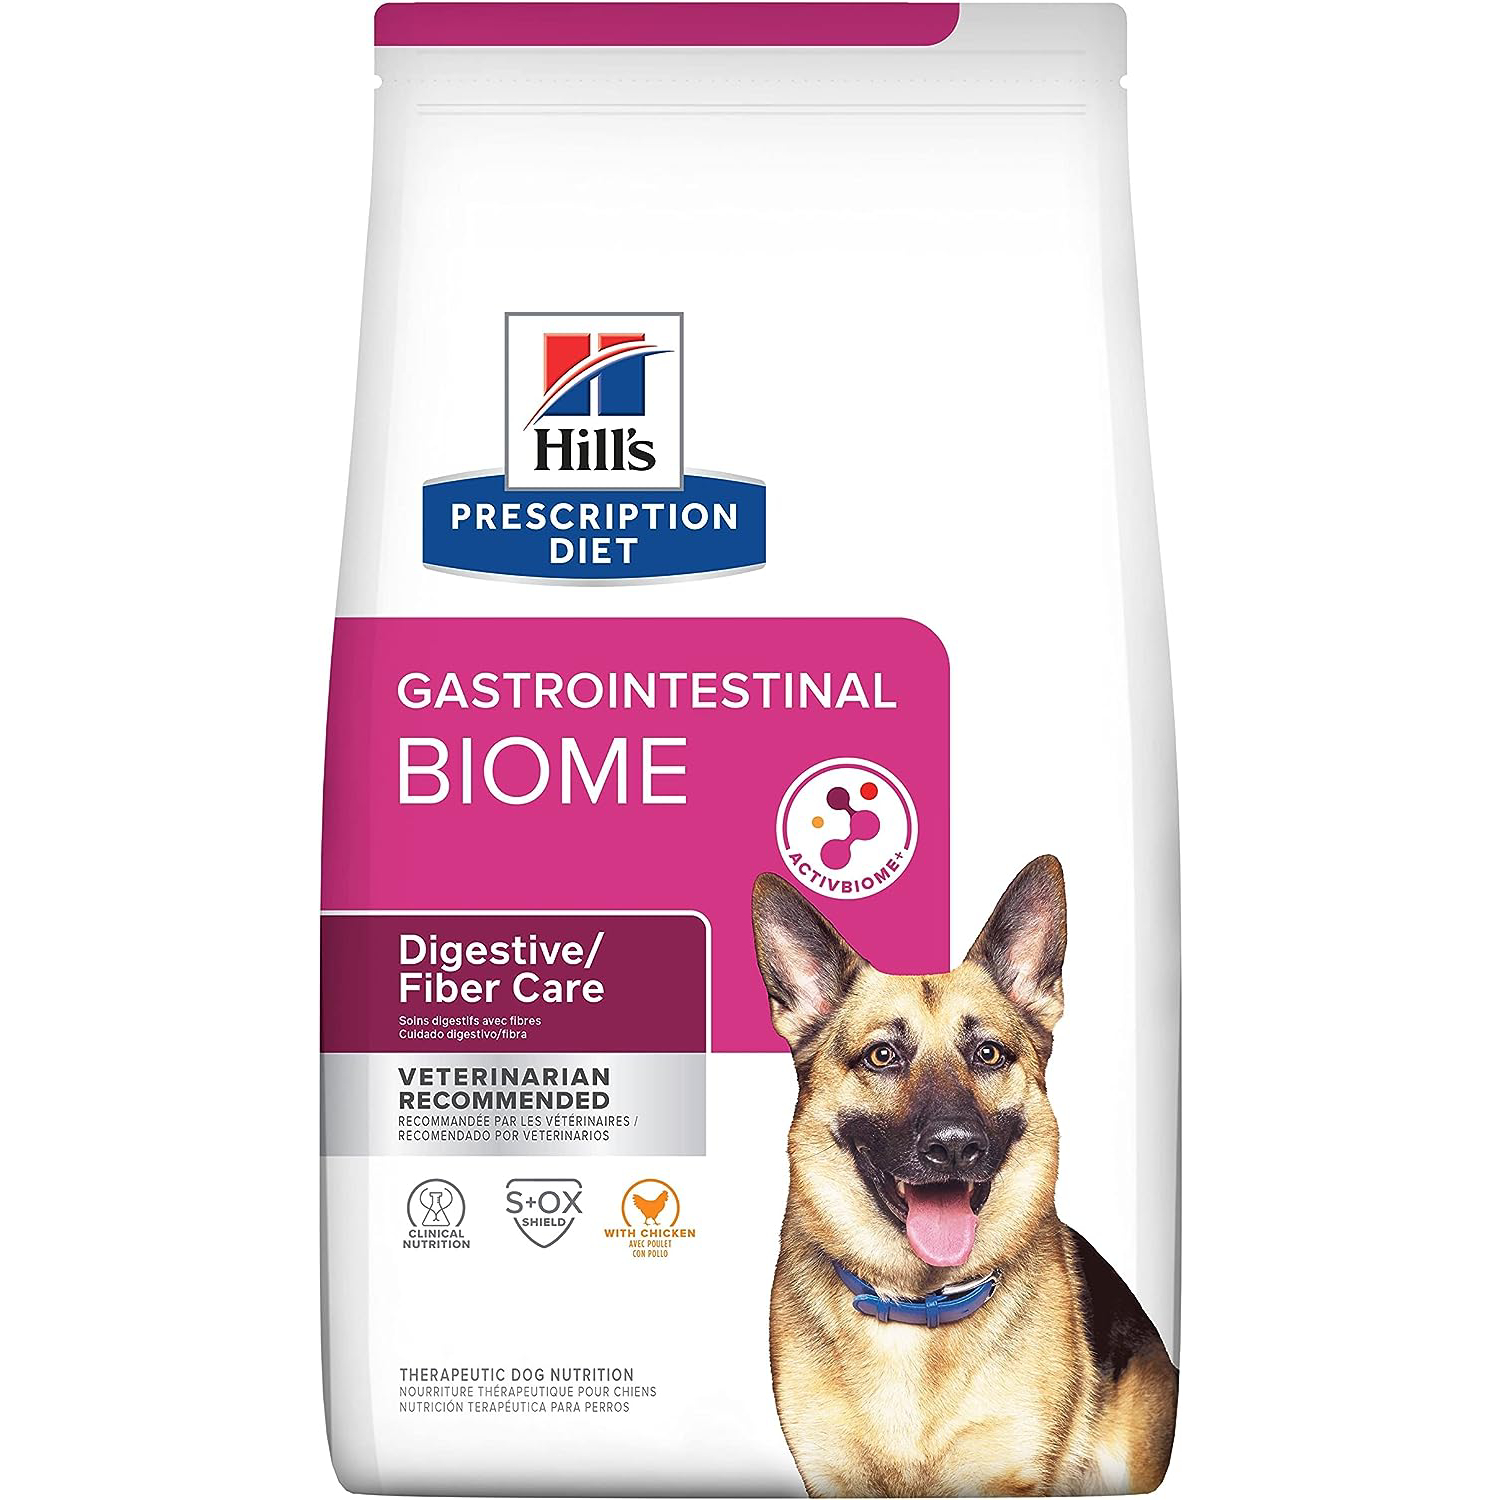 Hill's Prescription Diet Gastrointestinal Biome Digestive_Fiber Care with Chicken Dry Dog Food 